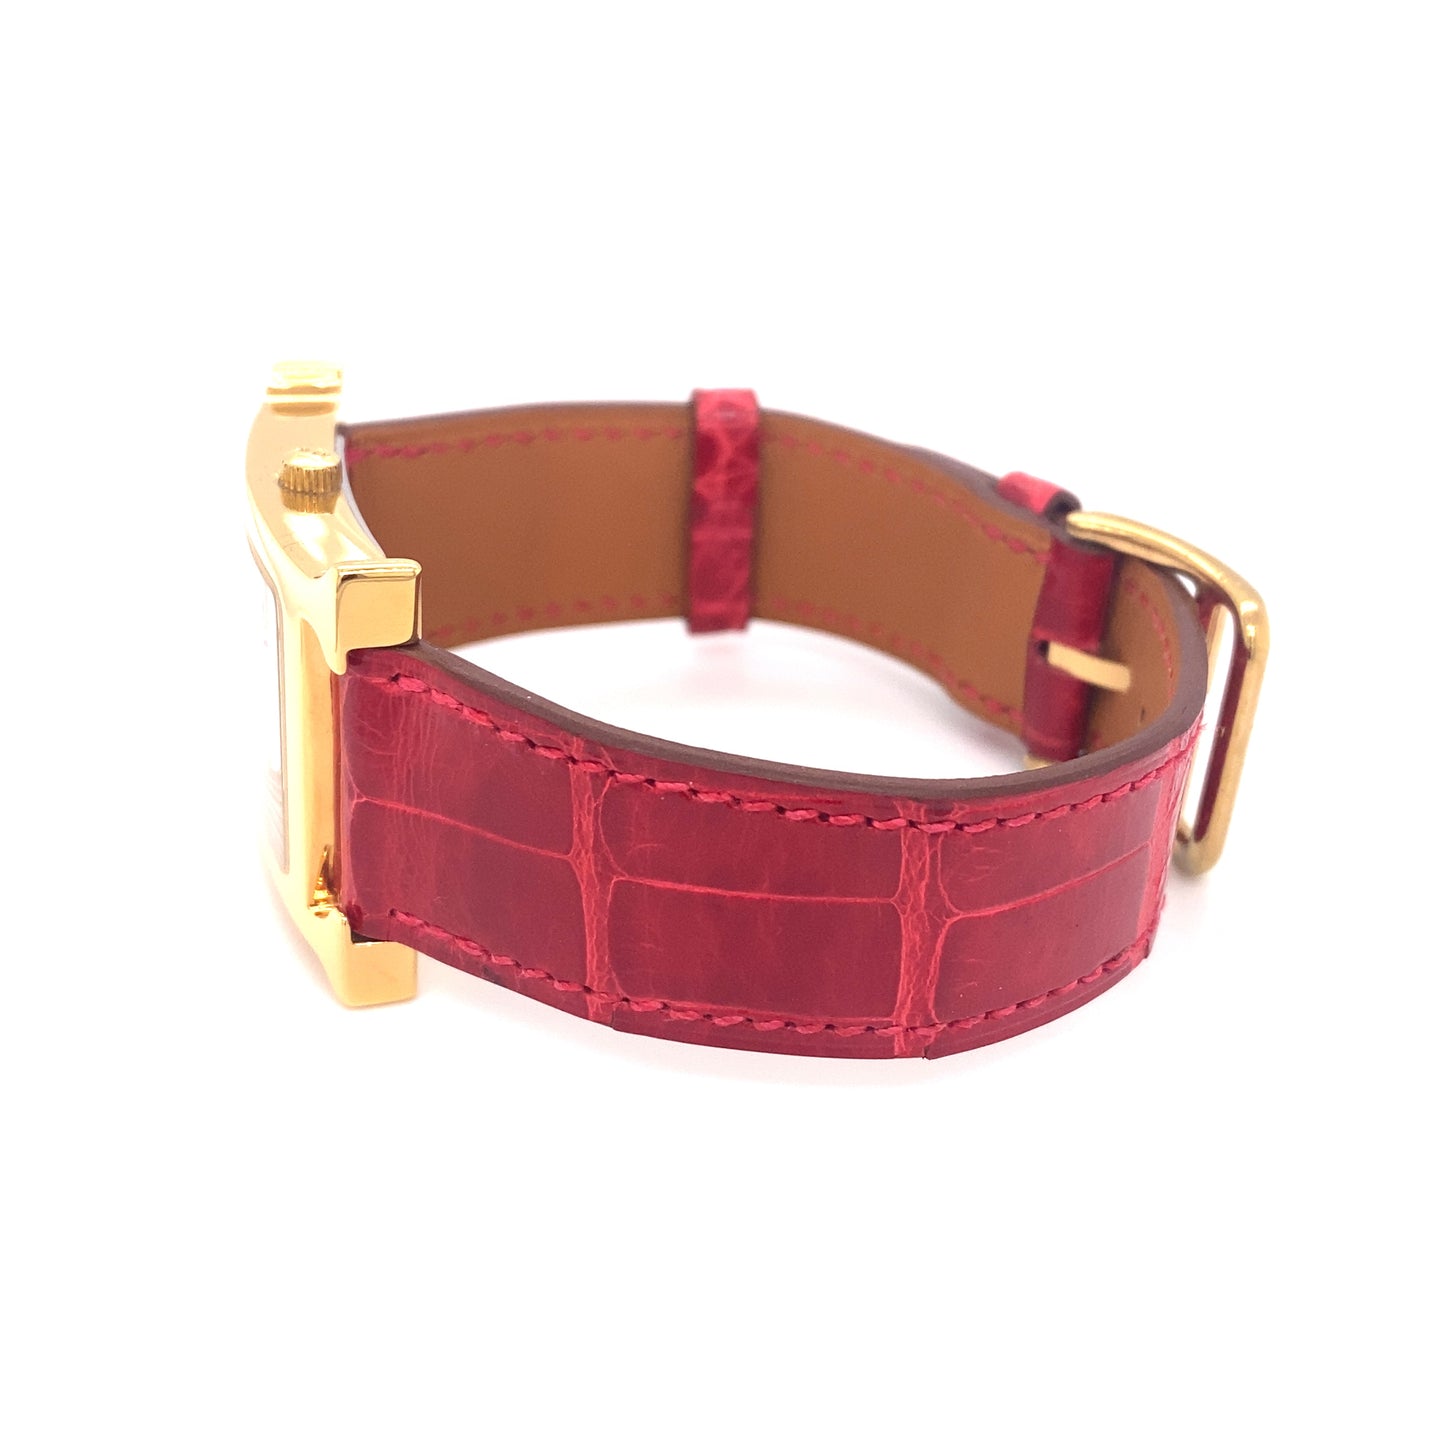 Hermès Heure Womens' Gold Tone Wrist Watch with Red Leather Band